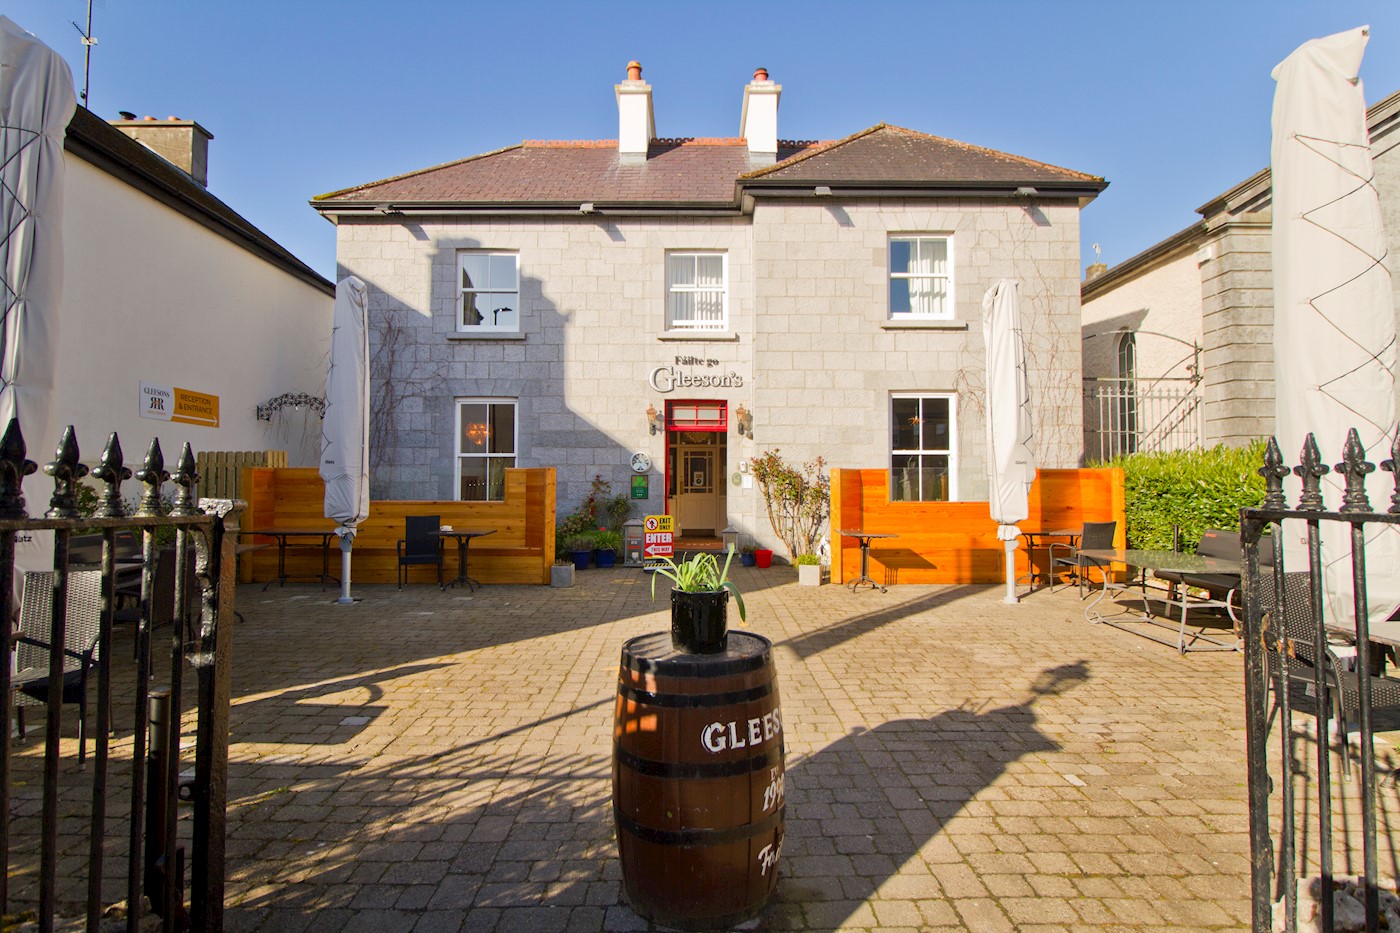 Property known as Gleesons Townhouse and Restaurant, The Square, Ardnanagh, Roscommon Town, Co. Roscommon, F42 WA22 1/11